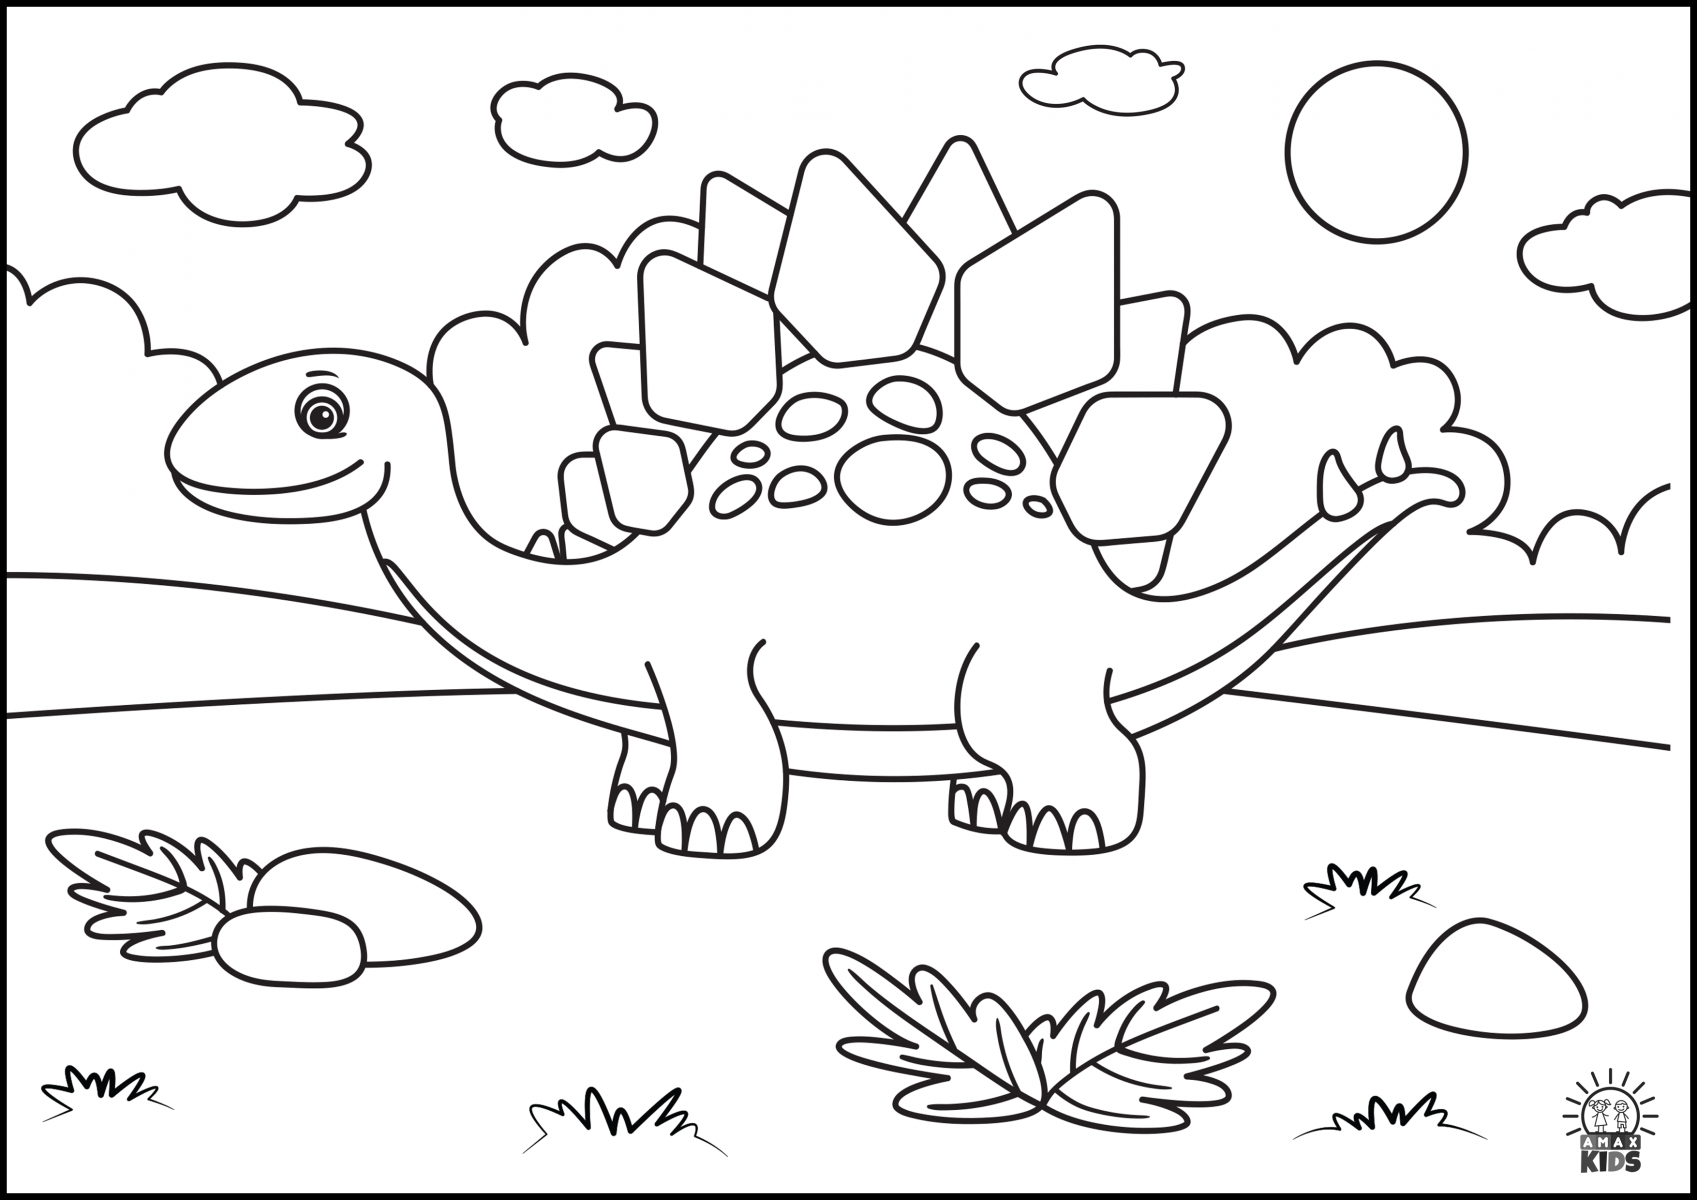 stegosaurus coloring page - Coloring Pages